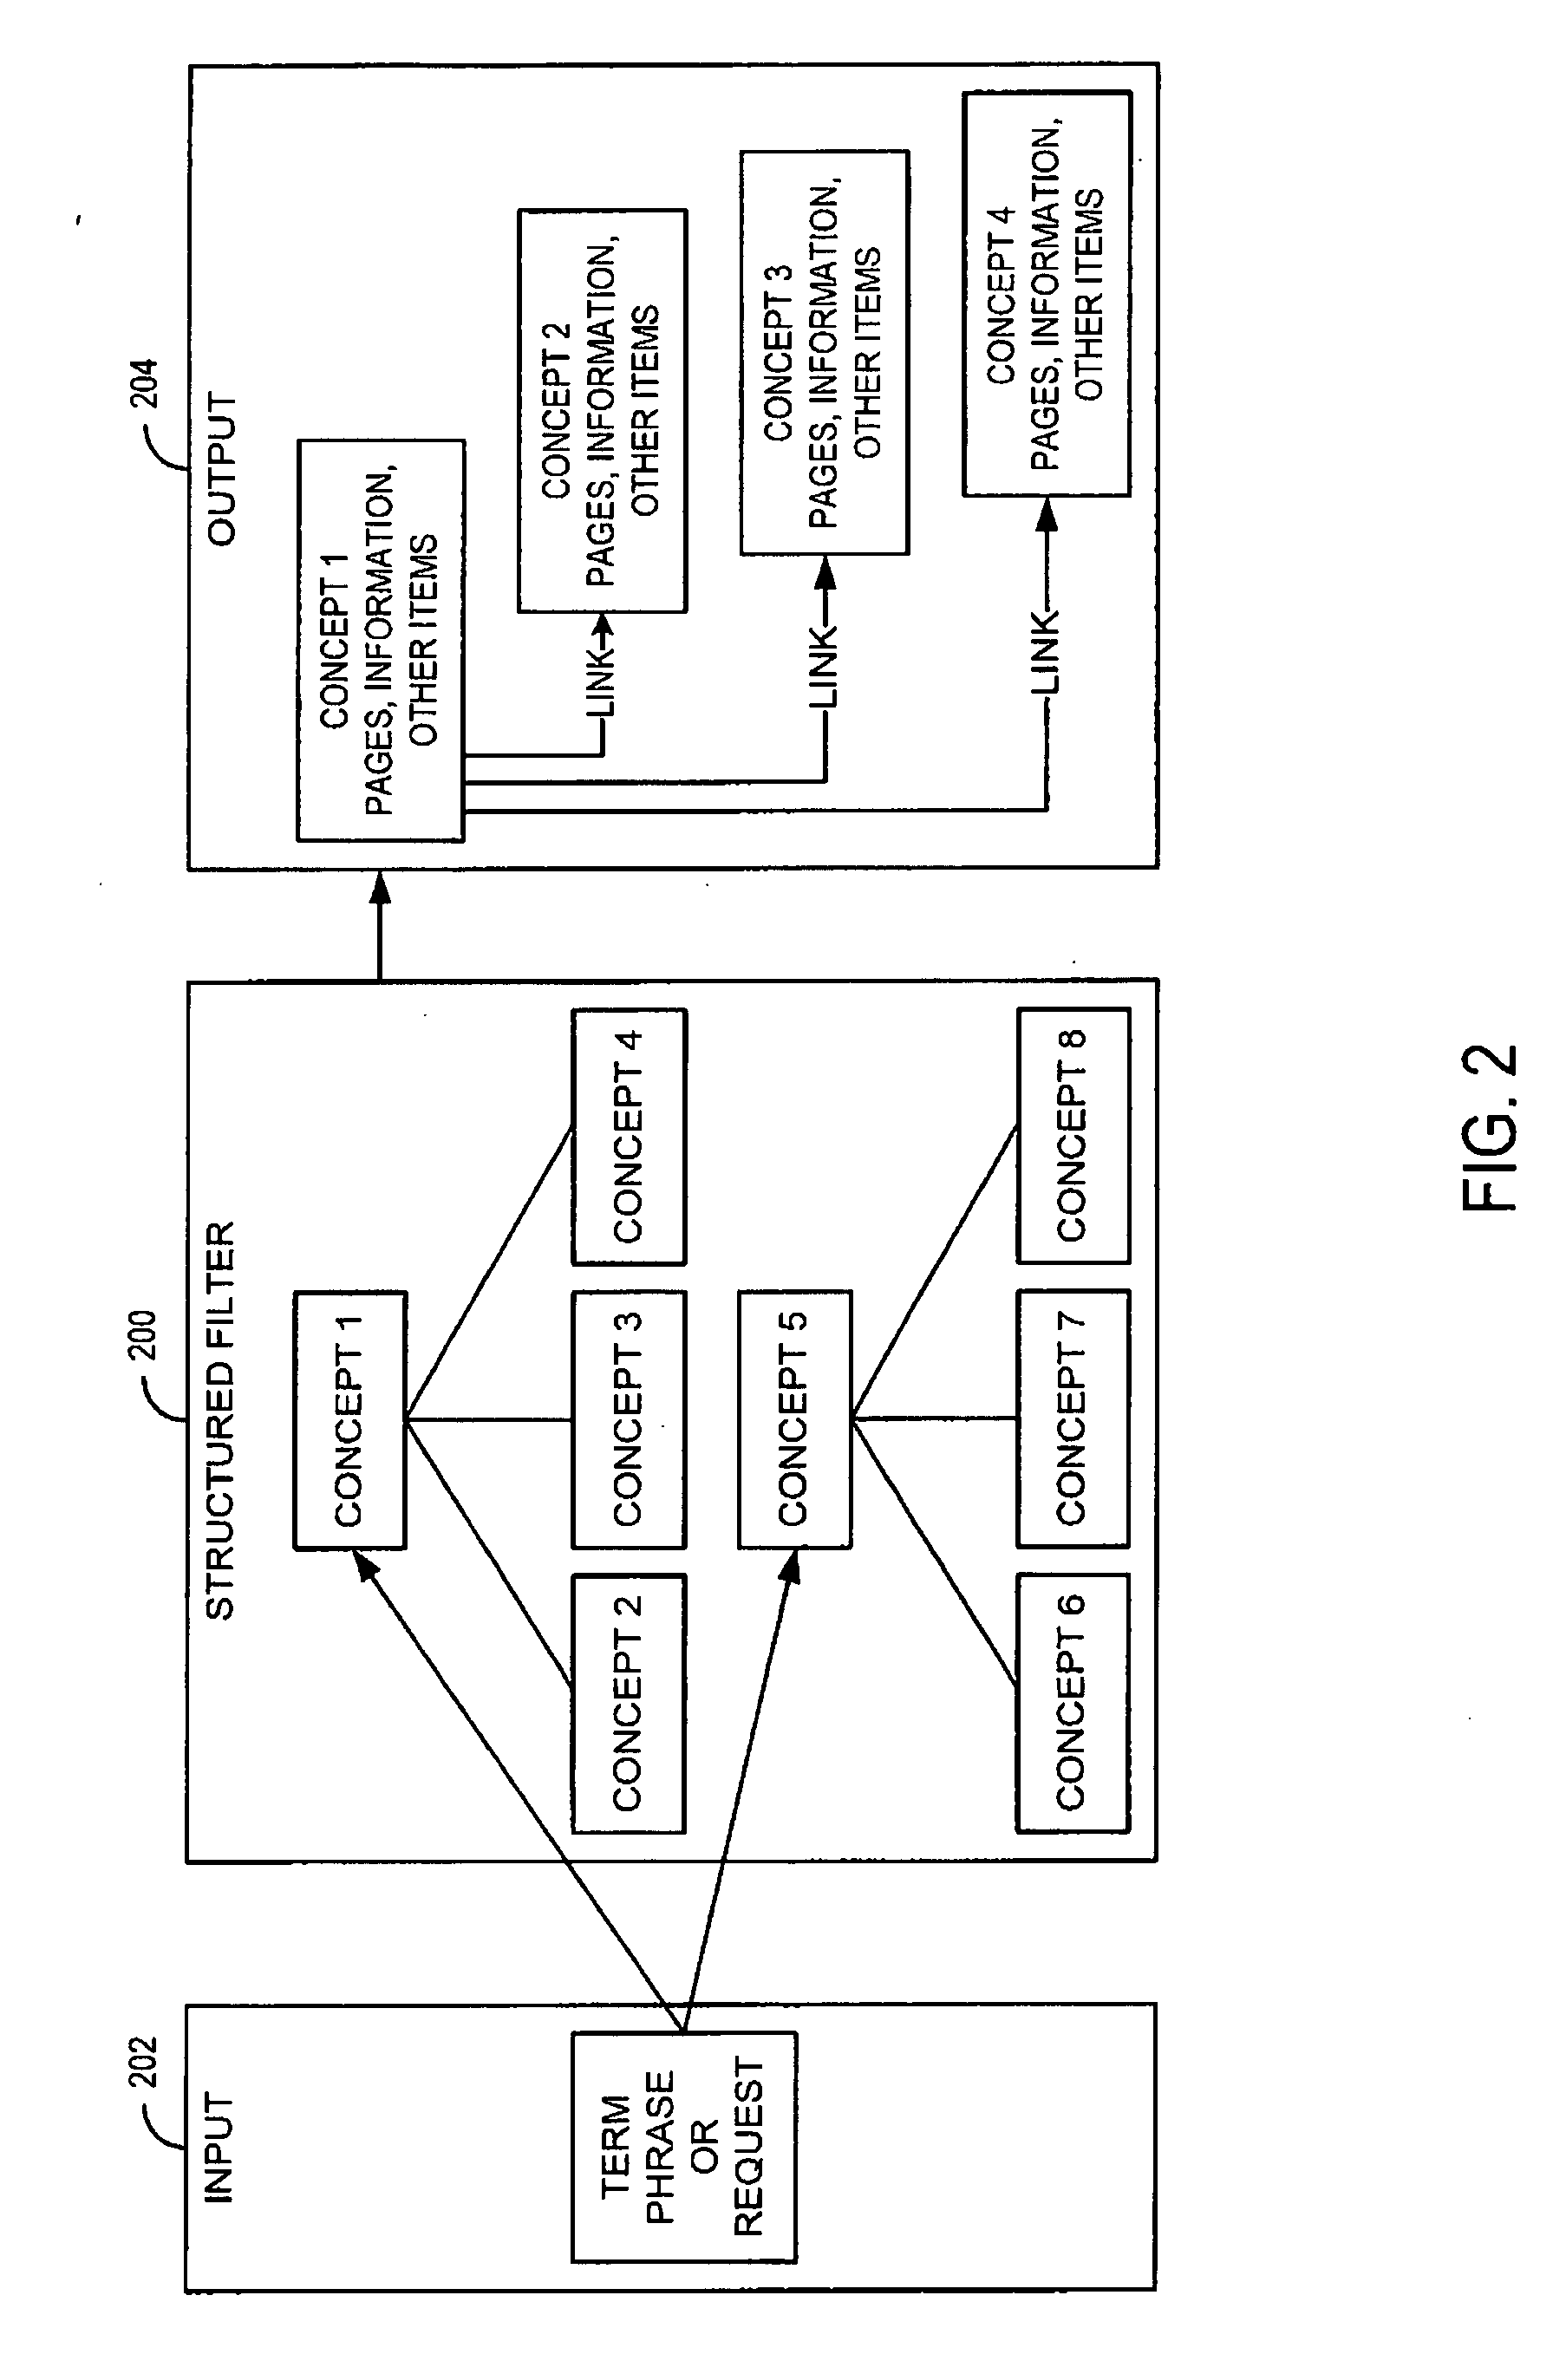 System and method for collaborative knowledge structure creation and management